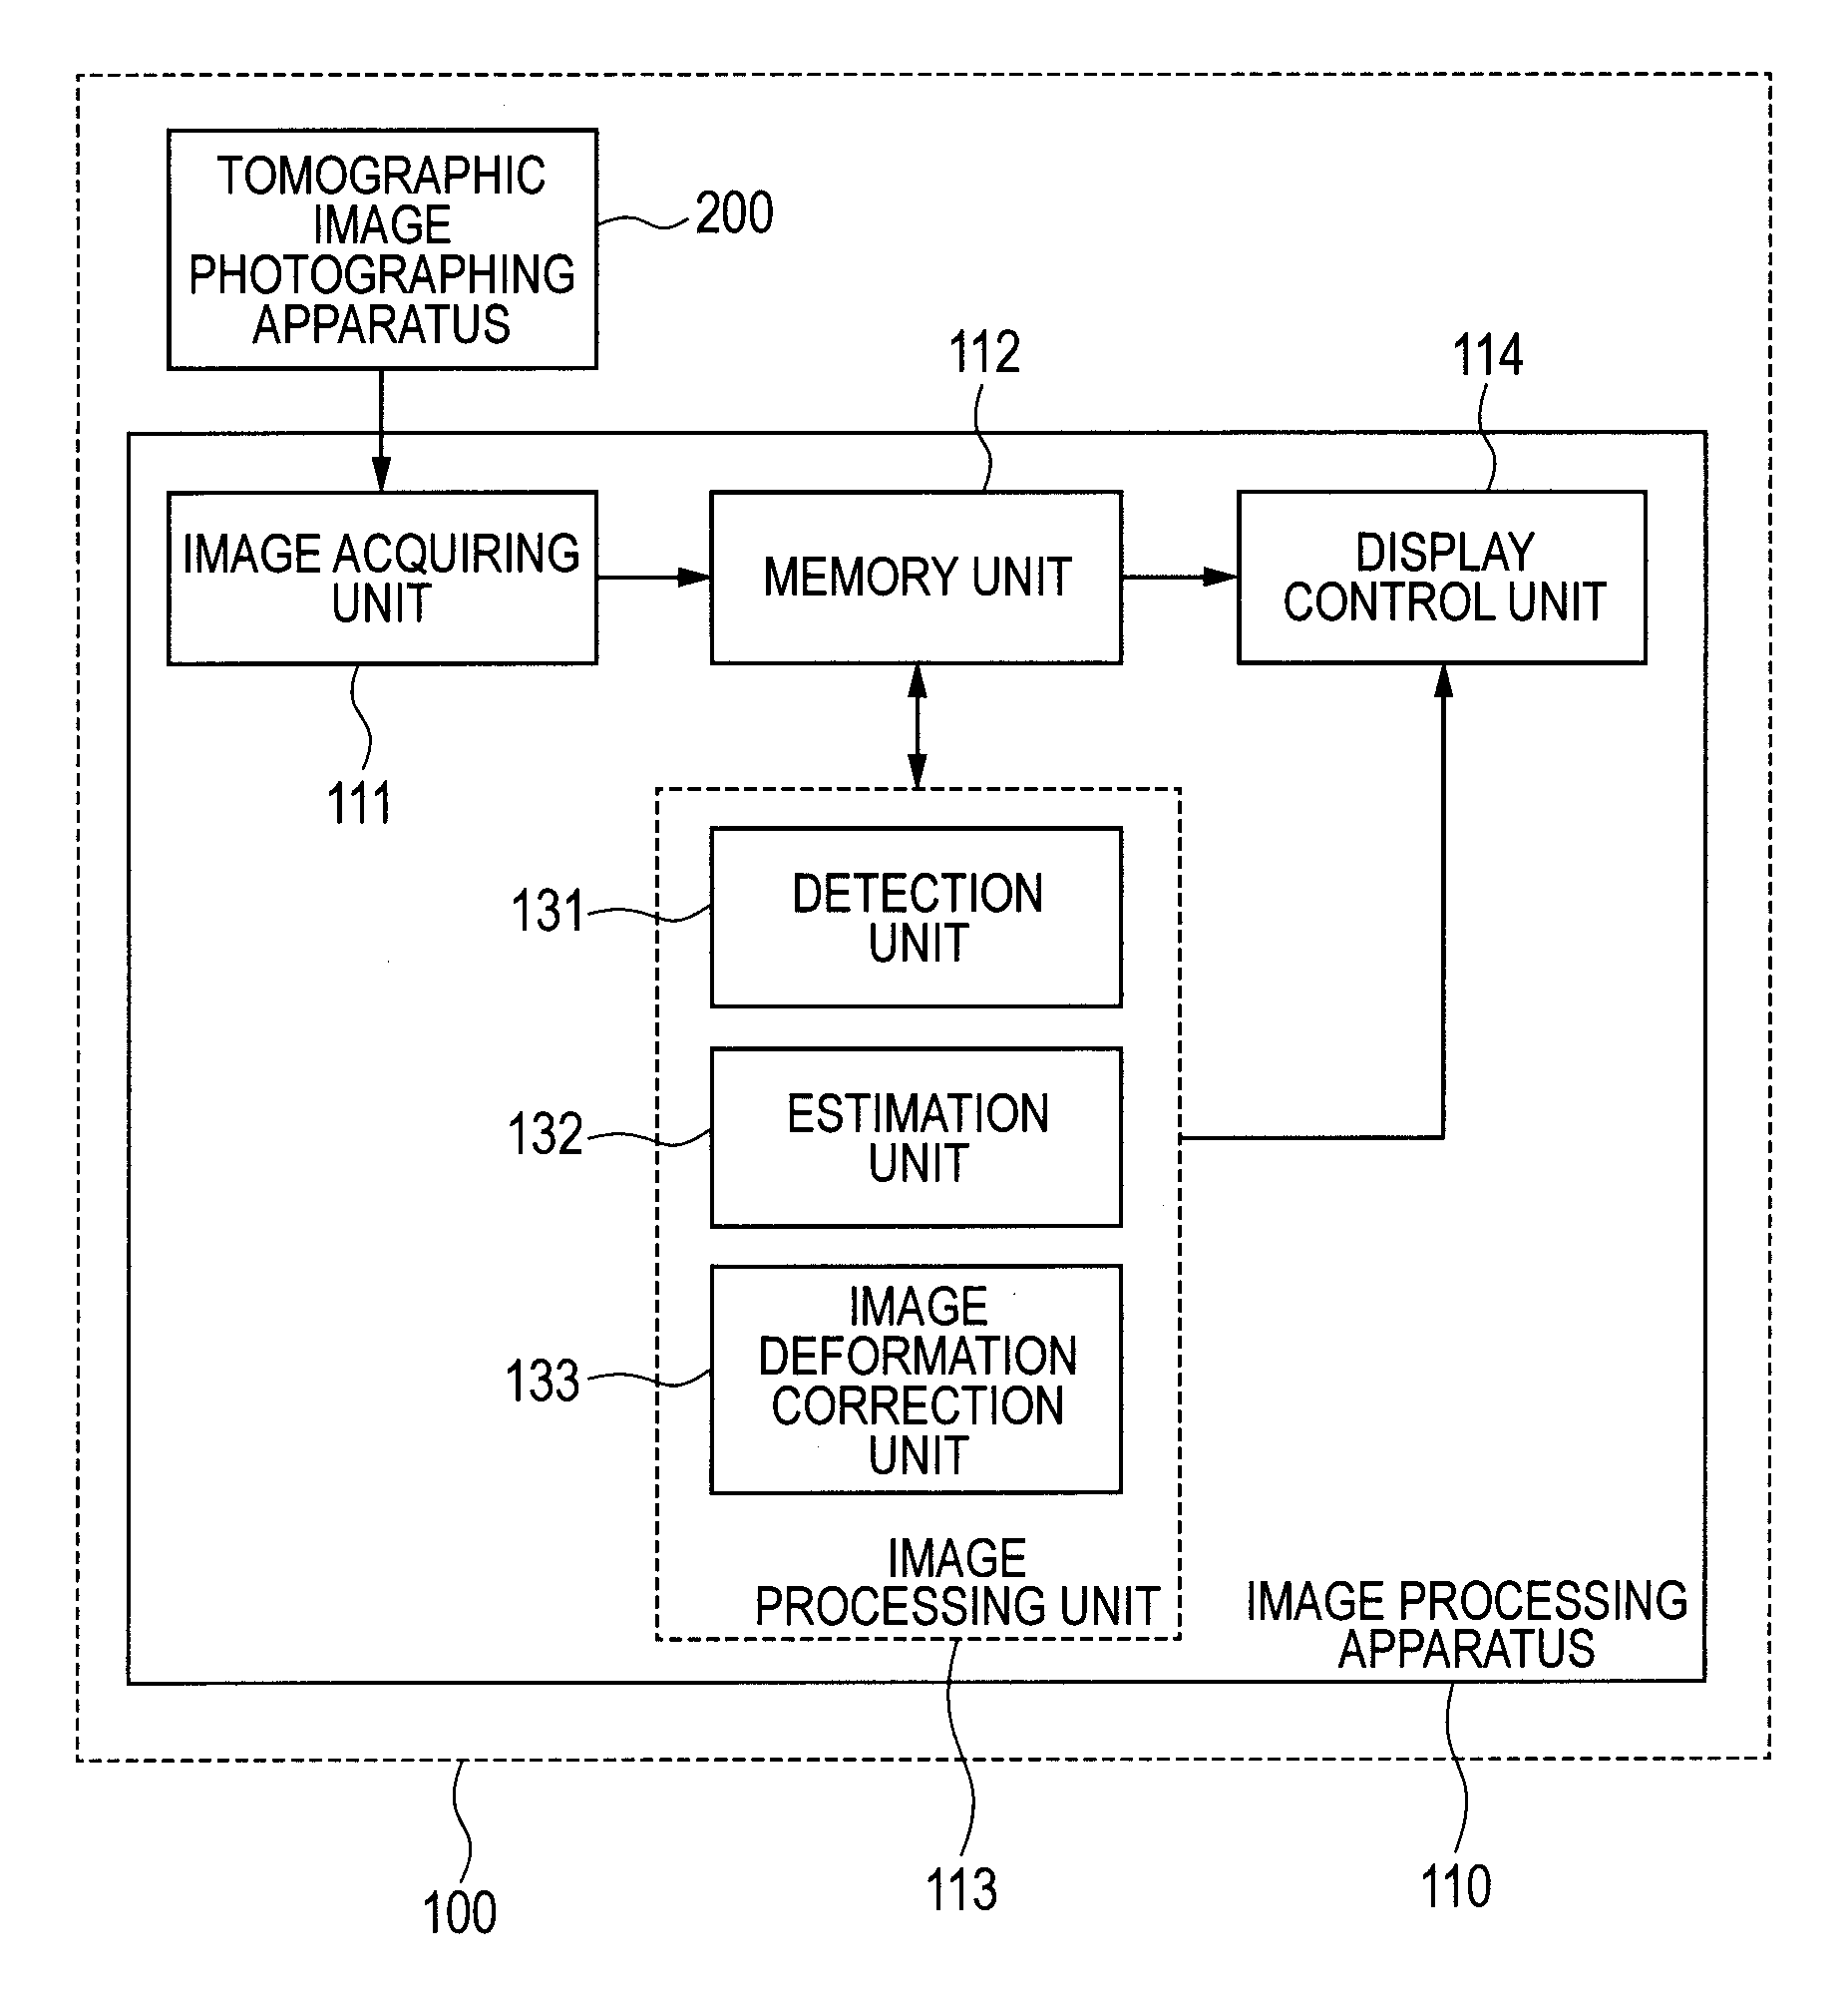 Image processing apparatus and method for correcting deformation in a tomographic image